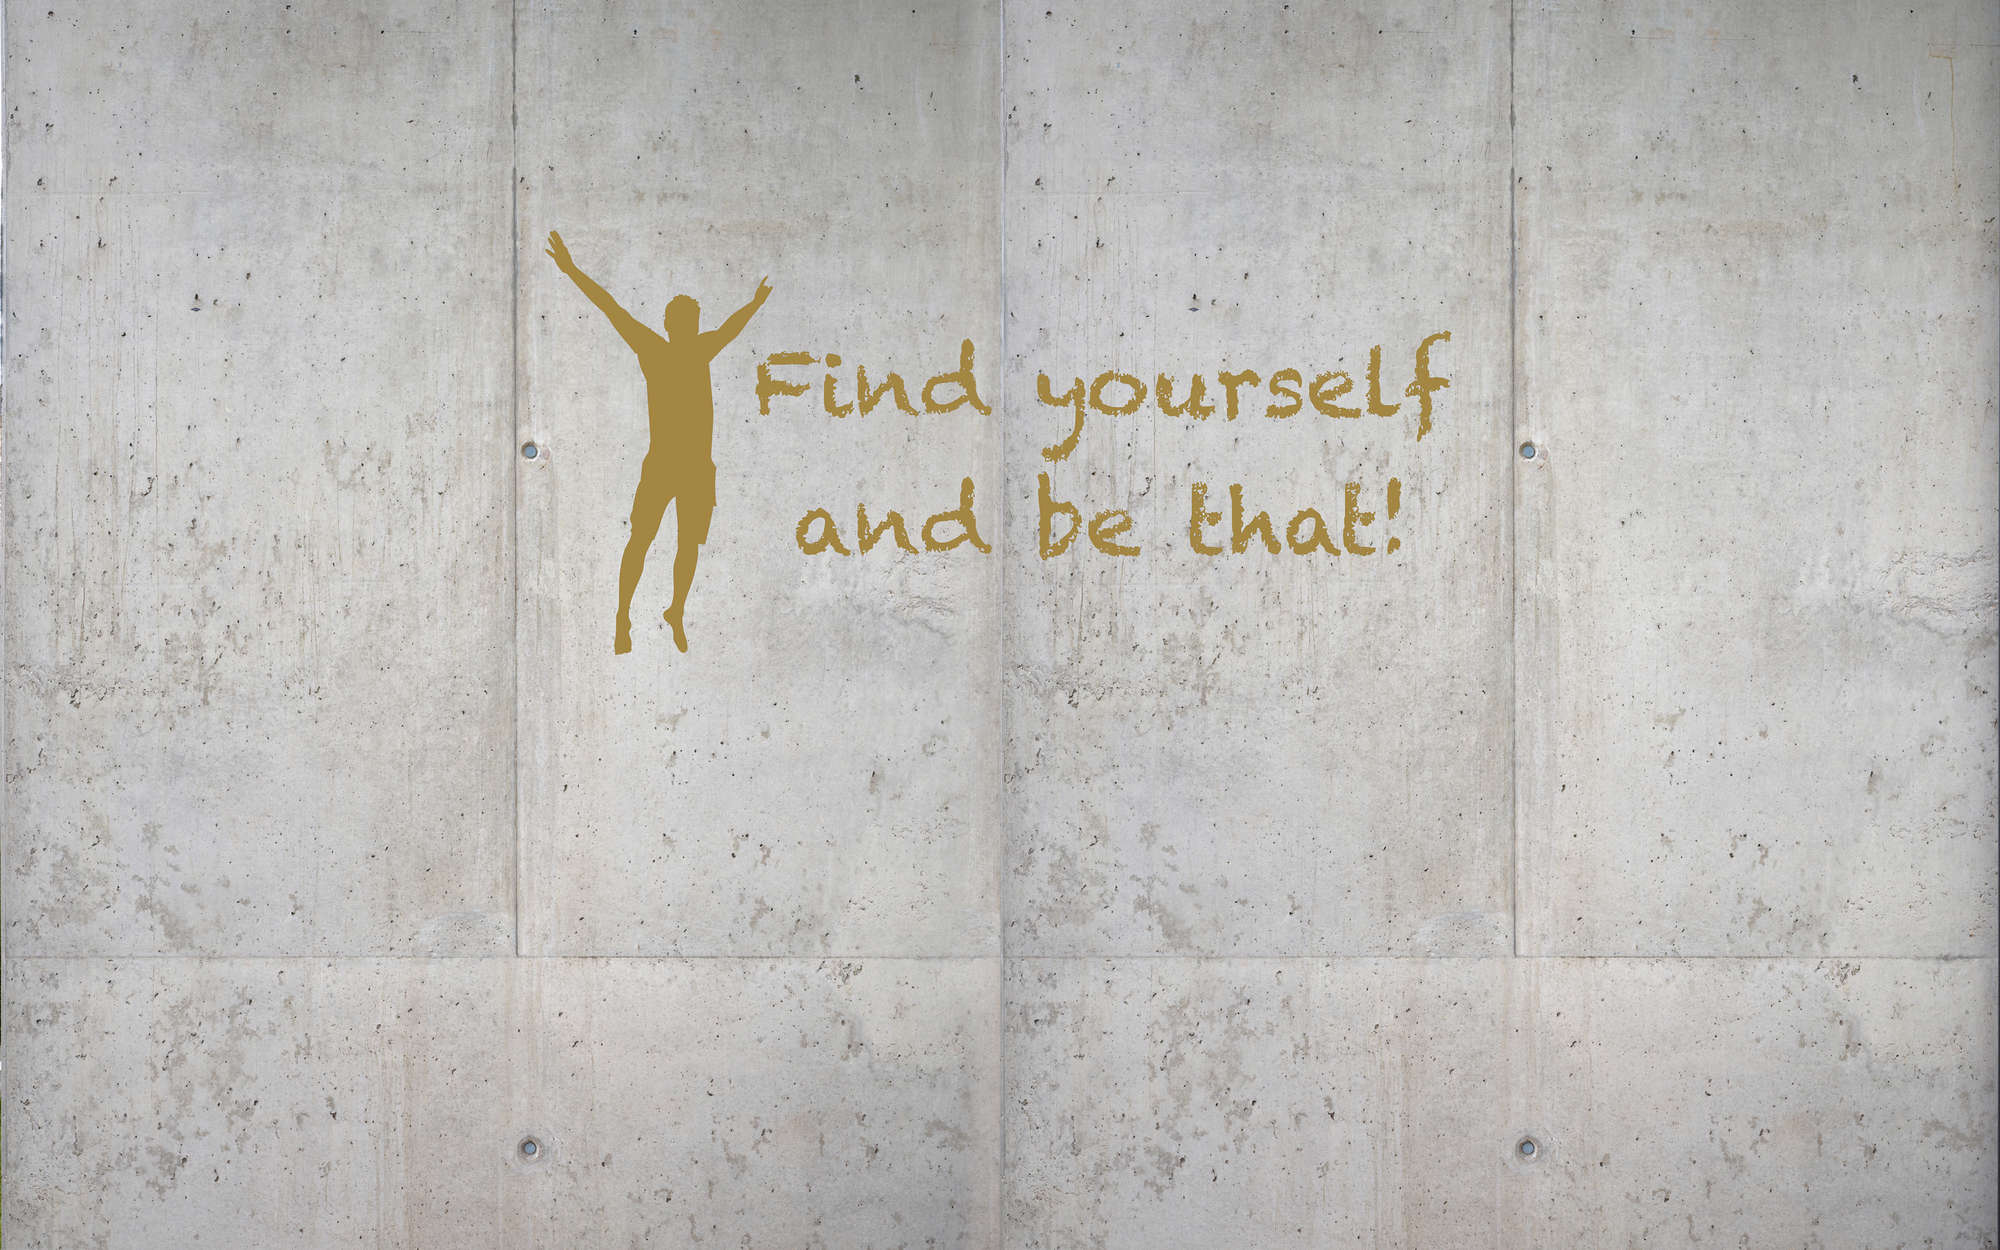             Concrete wall mural with lettering - textured non-woven
        